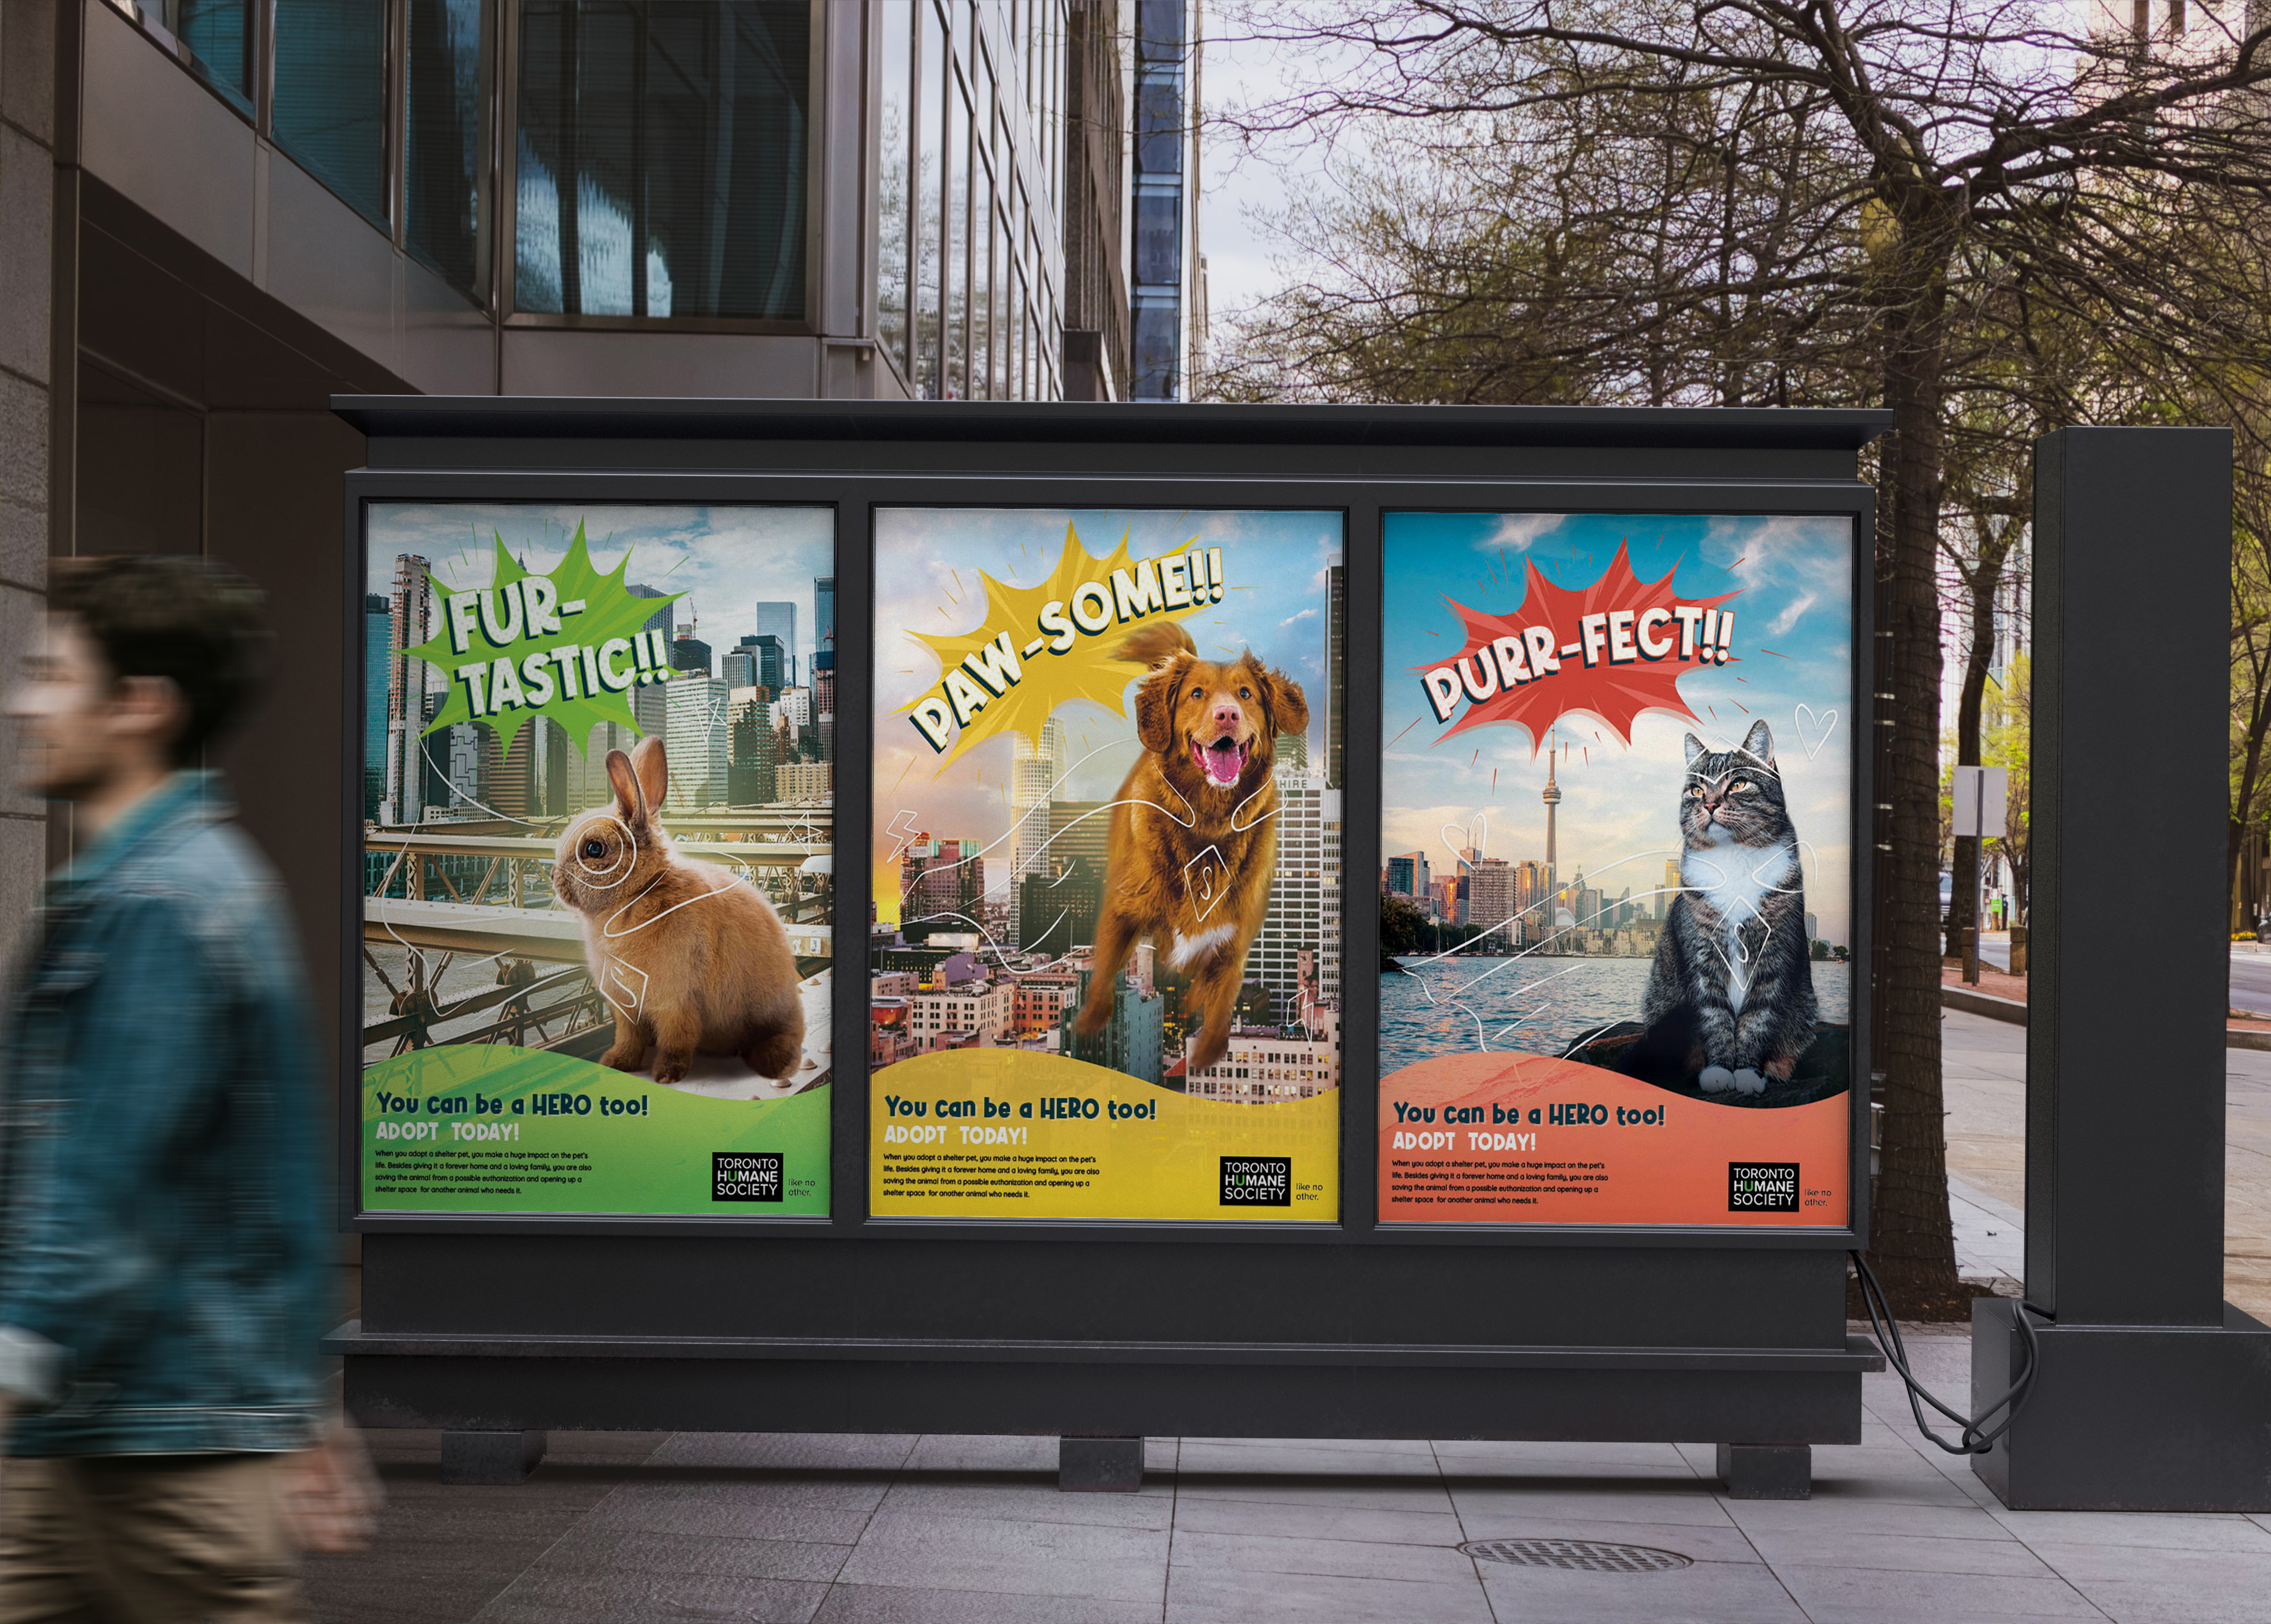 This is an image of street billboards.